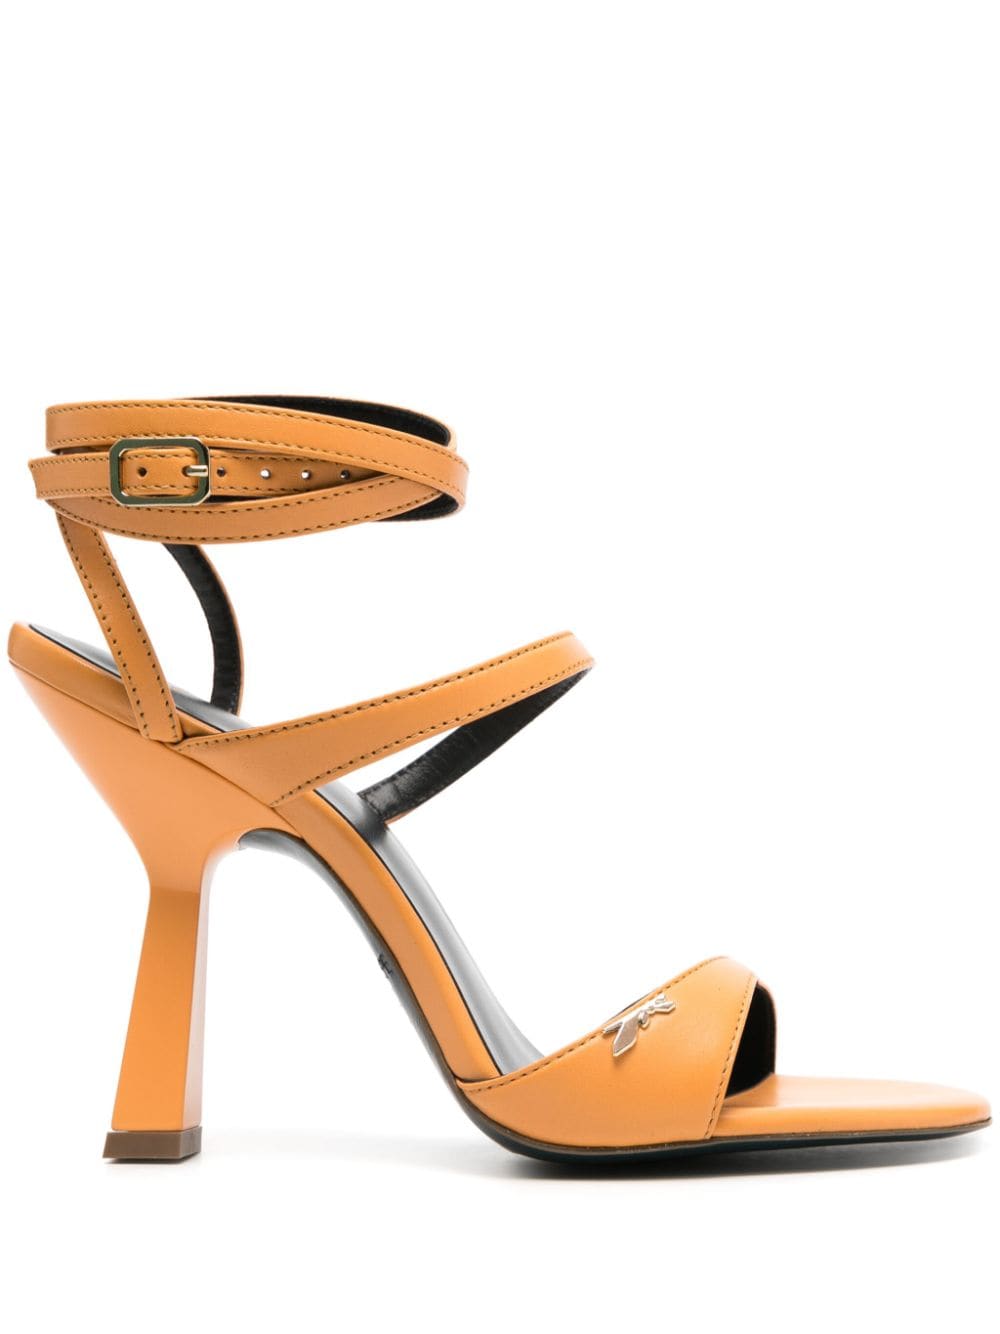 100mm ankle-strap sandals